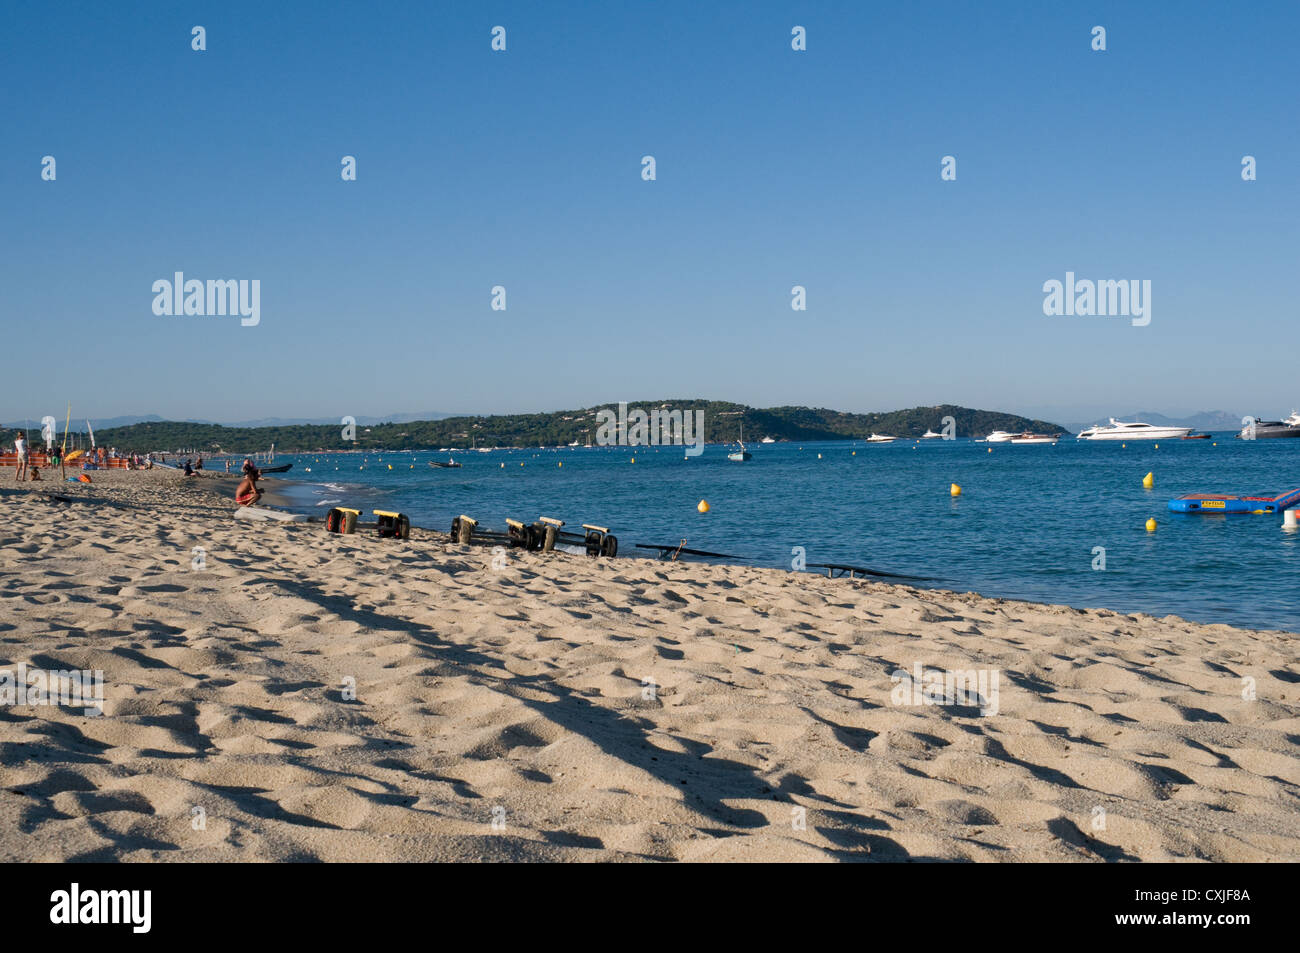 Tourists enjoy the sandy Pampelonne beach in the south of France near St Tropez.. luxury boats are moored in the bay. Stock Photo